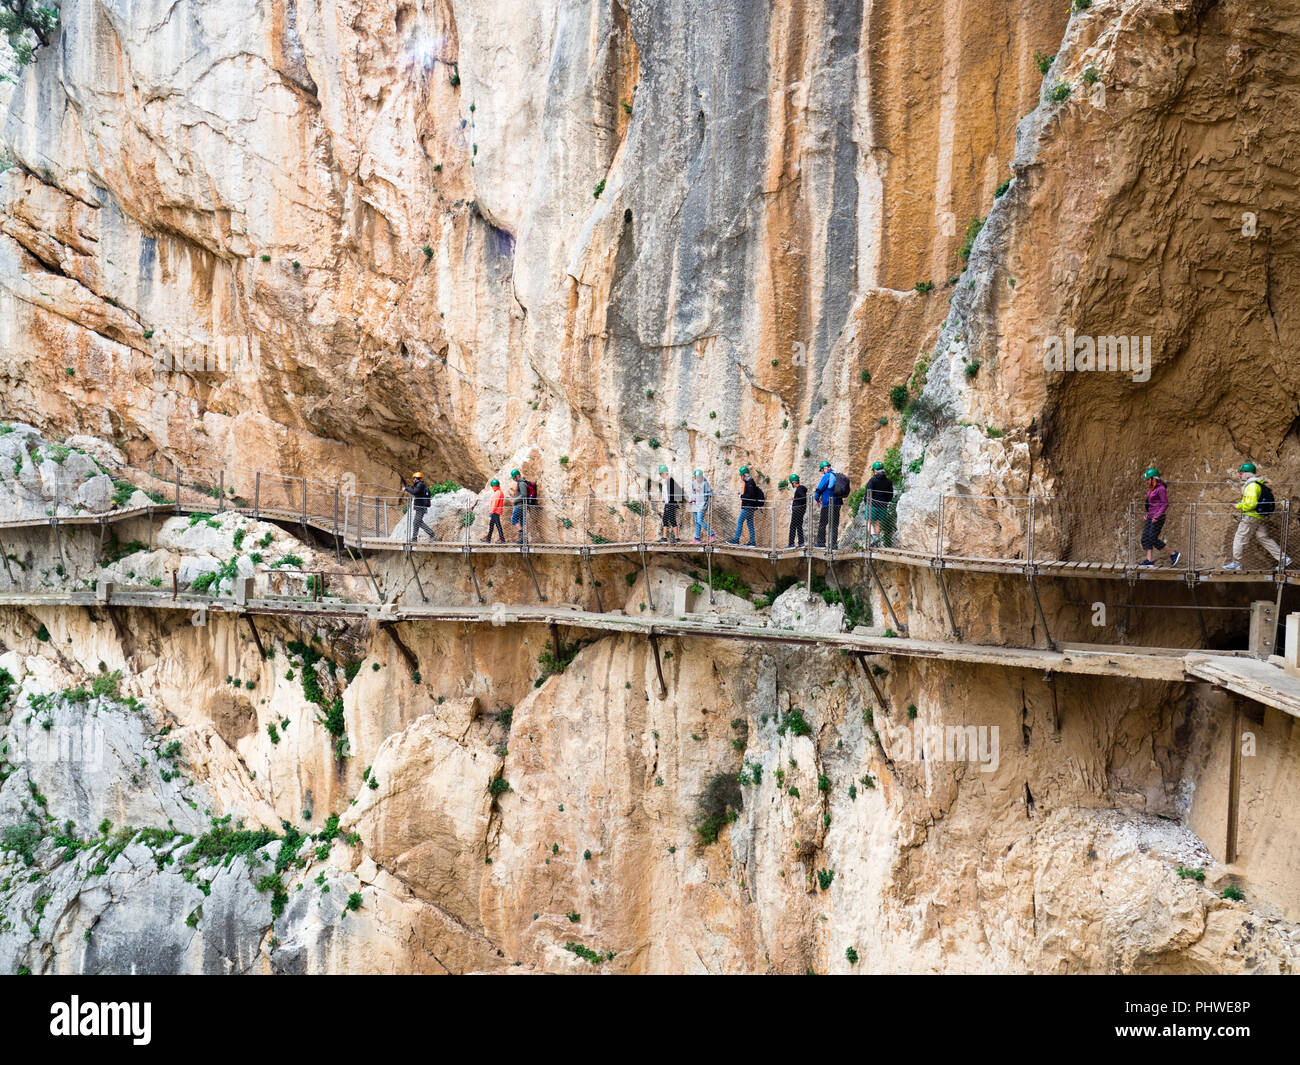 Walkways and dramatic cliffs of Caminito del Rey, Spain Stock Photo